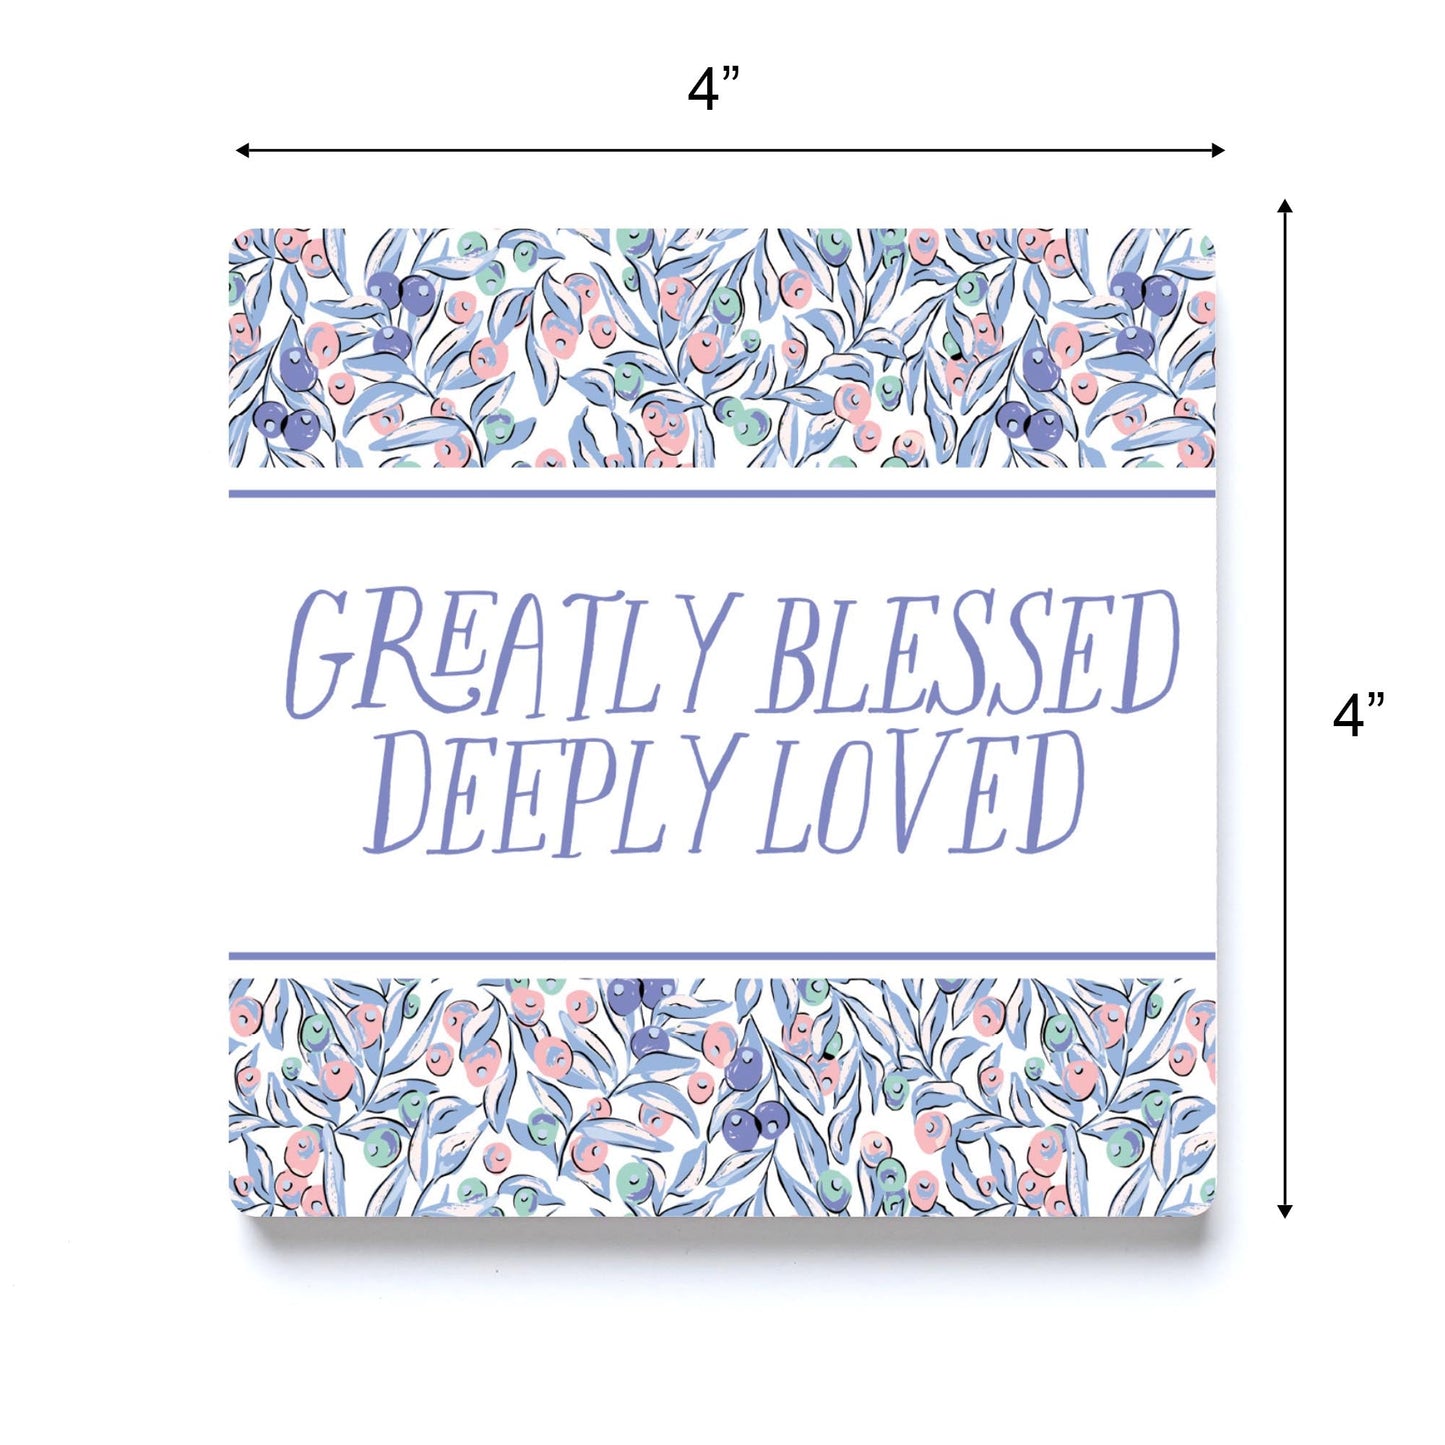 Clairmont & Co Faith Greatly Blessed Deeply Loved | 4x4